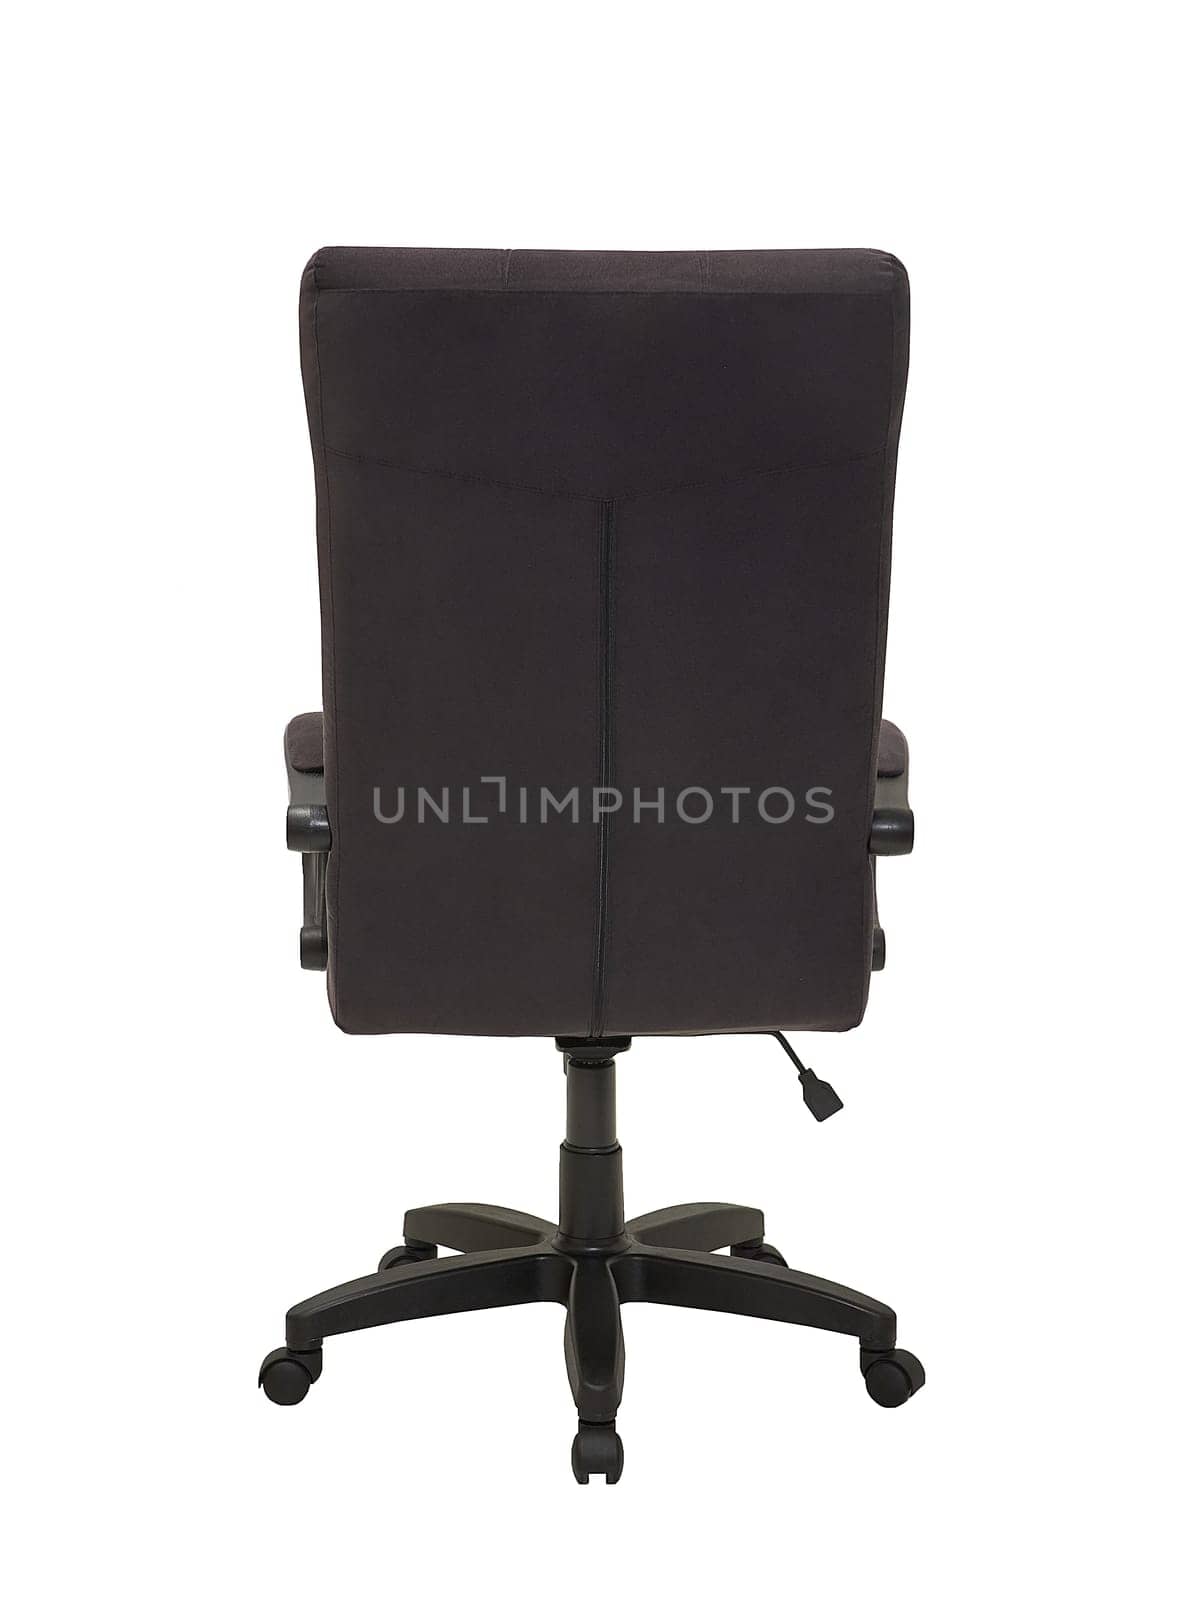 black office fabric armchair on wheels isolated on white background, back view. modern furniture, interior, home design